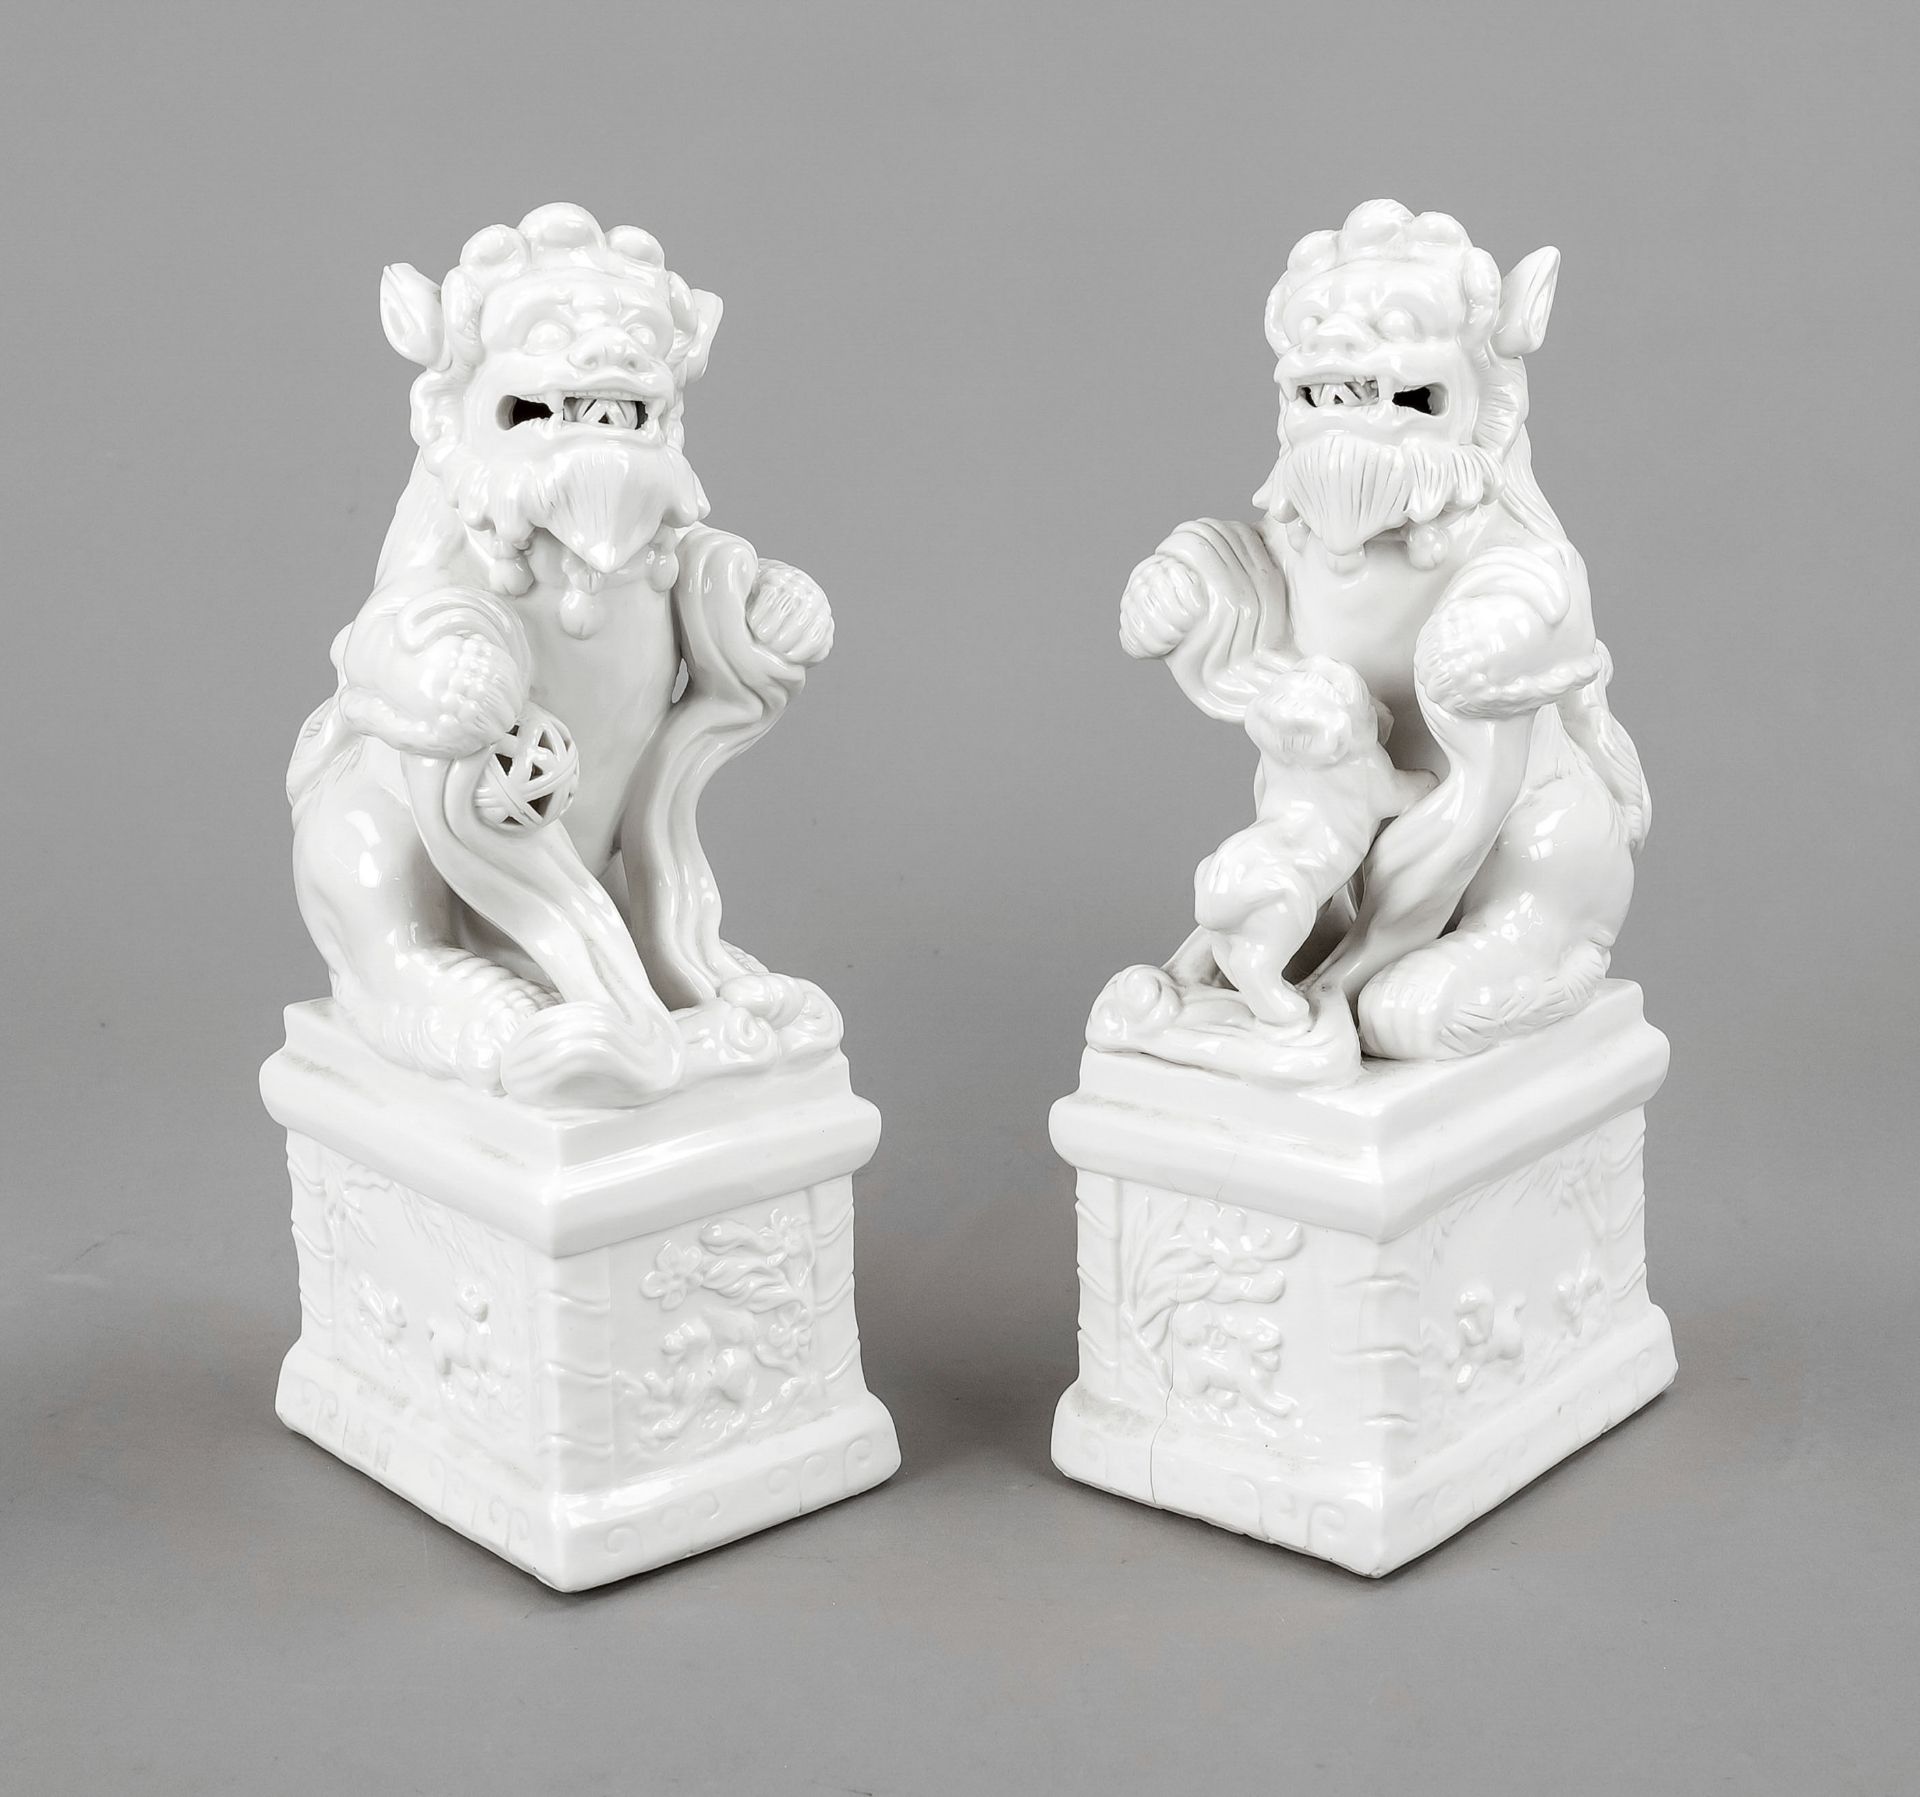 Pair of guardian lions Blanc de Chine, China, 19th/20th c., dehua porcelain of a male lion with a